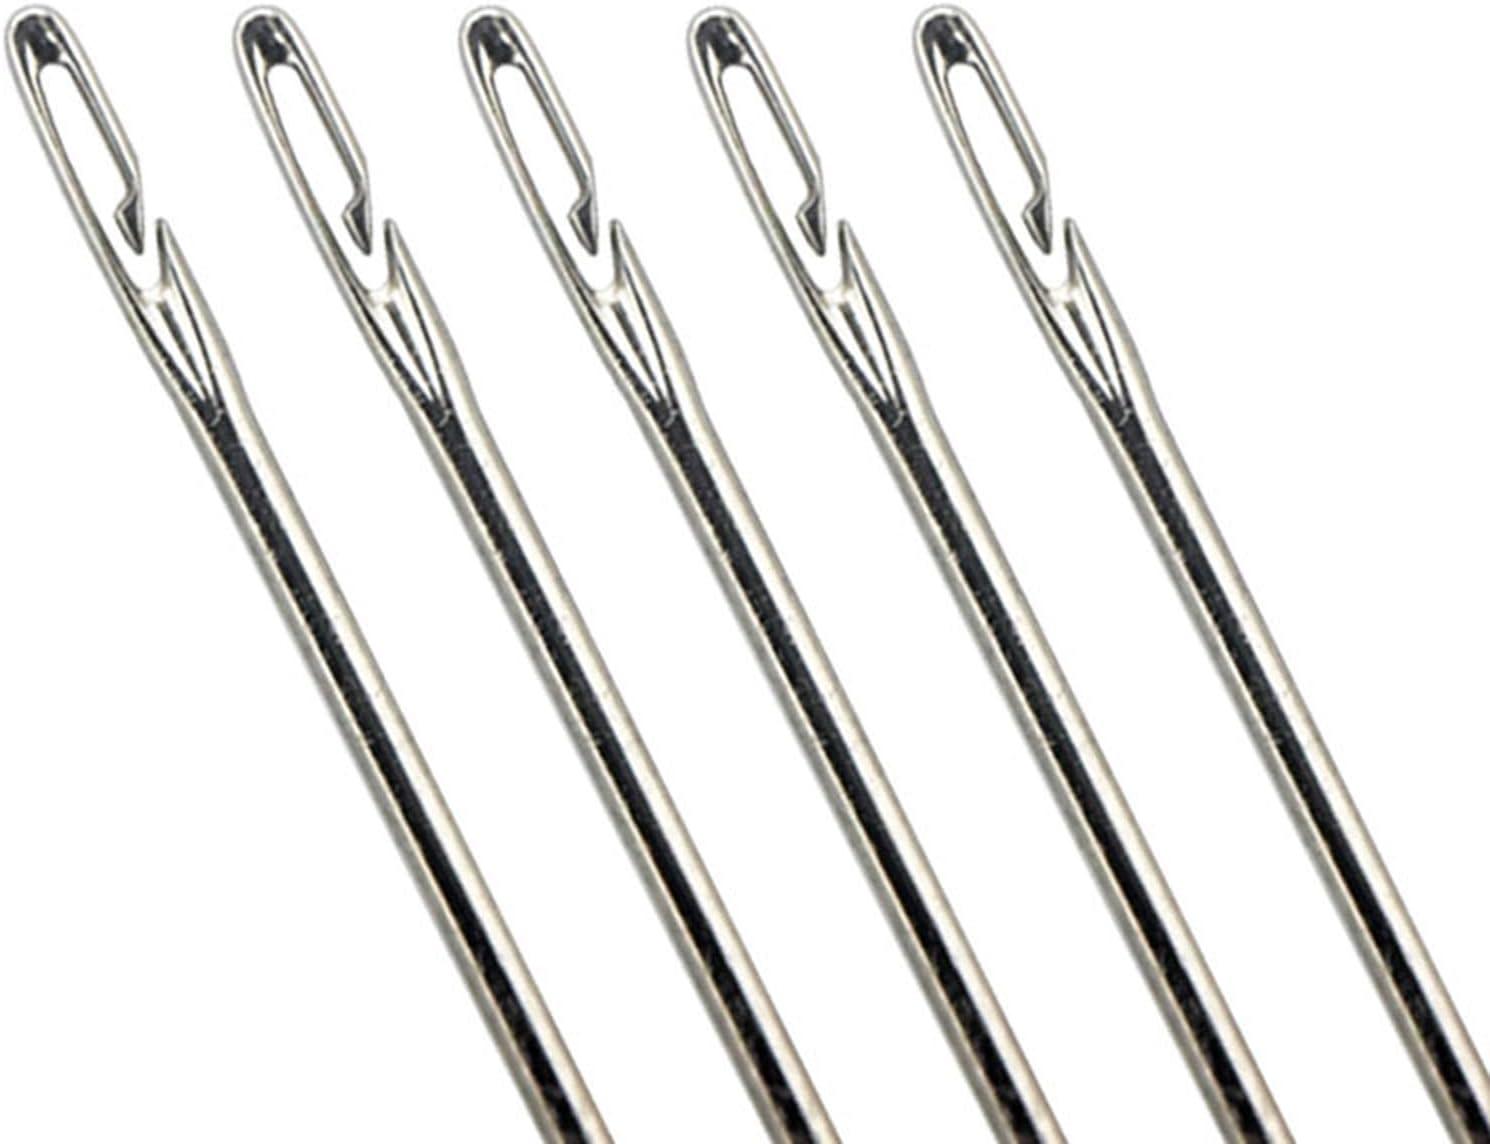  Sewmaster Needle-Side Hole Hand Sewing Tools, Needles for Hand  Sewing, Self Threading Needles for Hand Sewing, Easy Thread Needles, Hand  Embroidery Needles for Quilting (A+C)